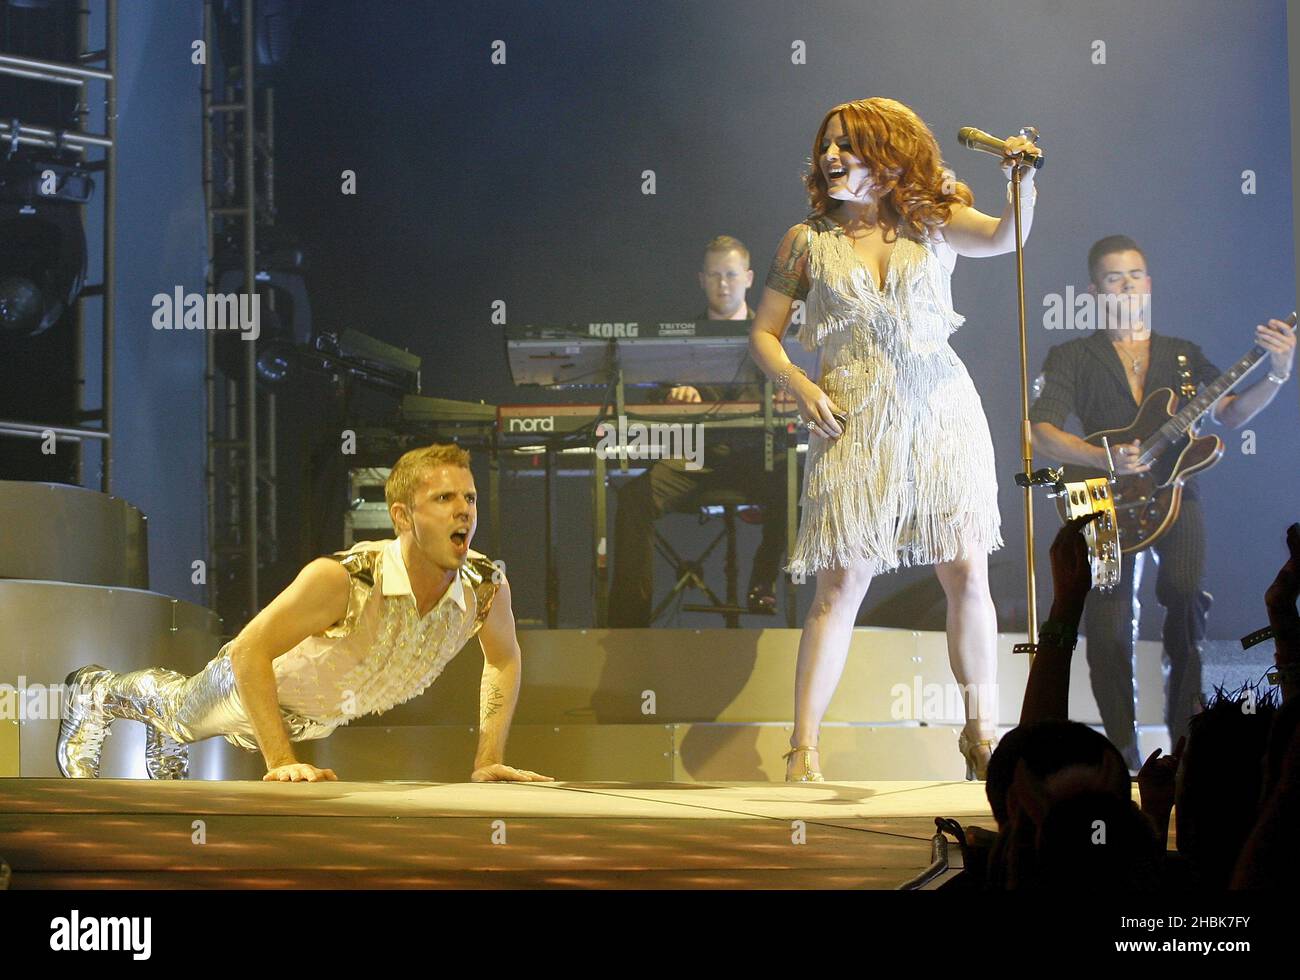 Scissor Sisters perform at the 02 Arena, North Greenwich. Stock Photo